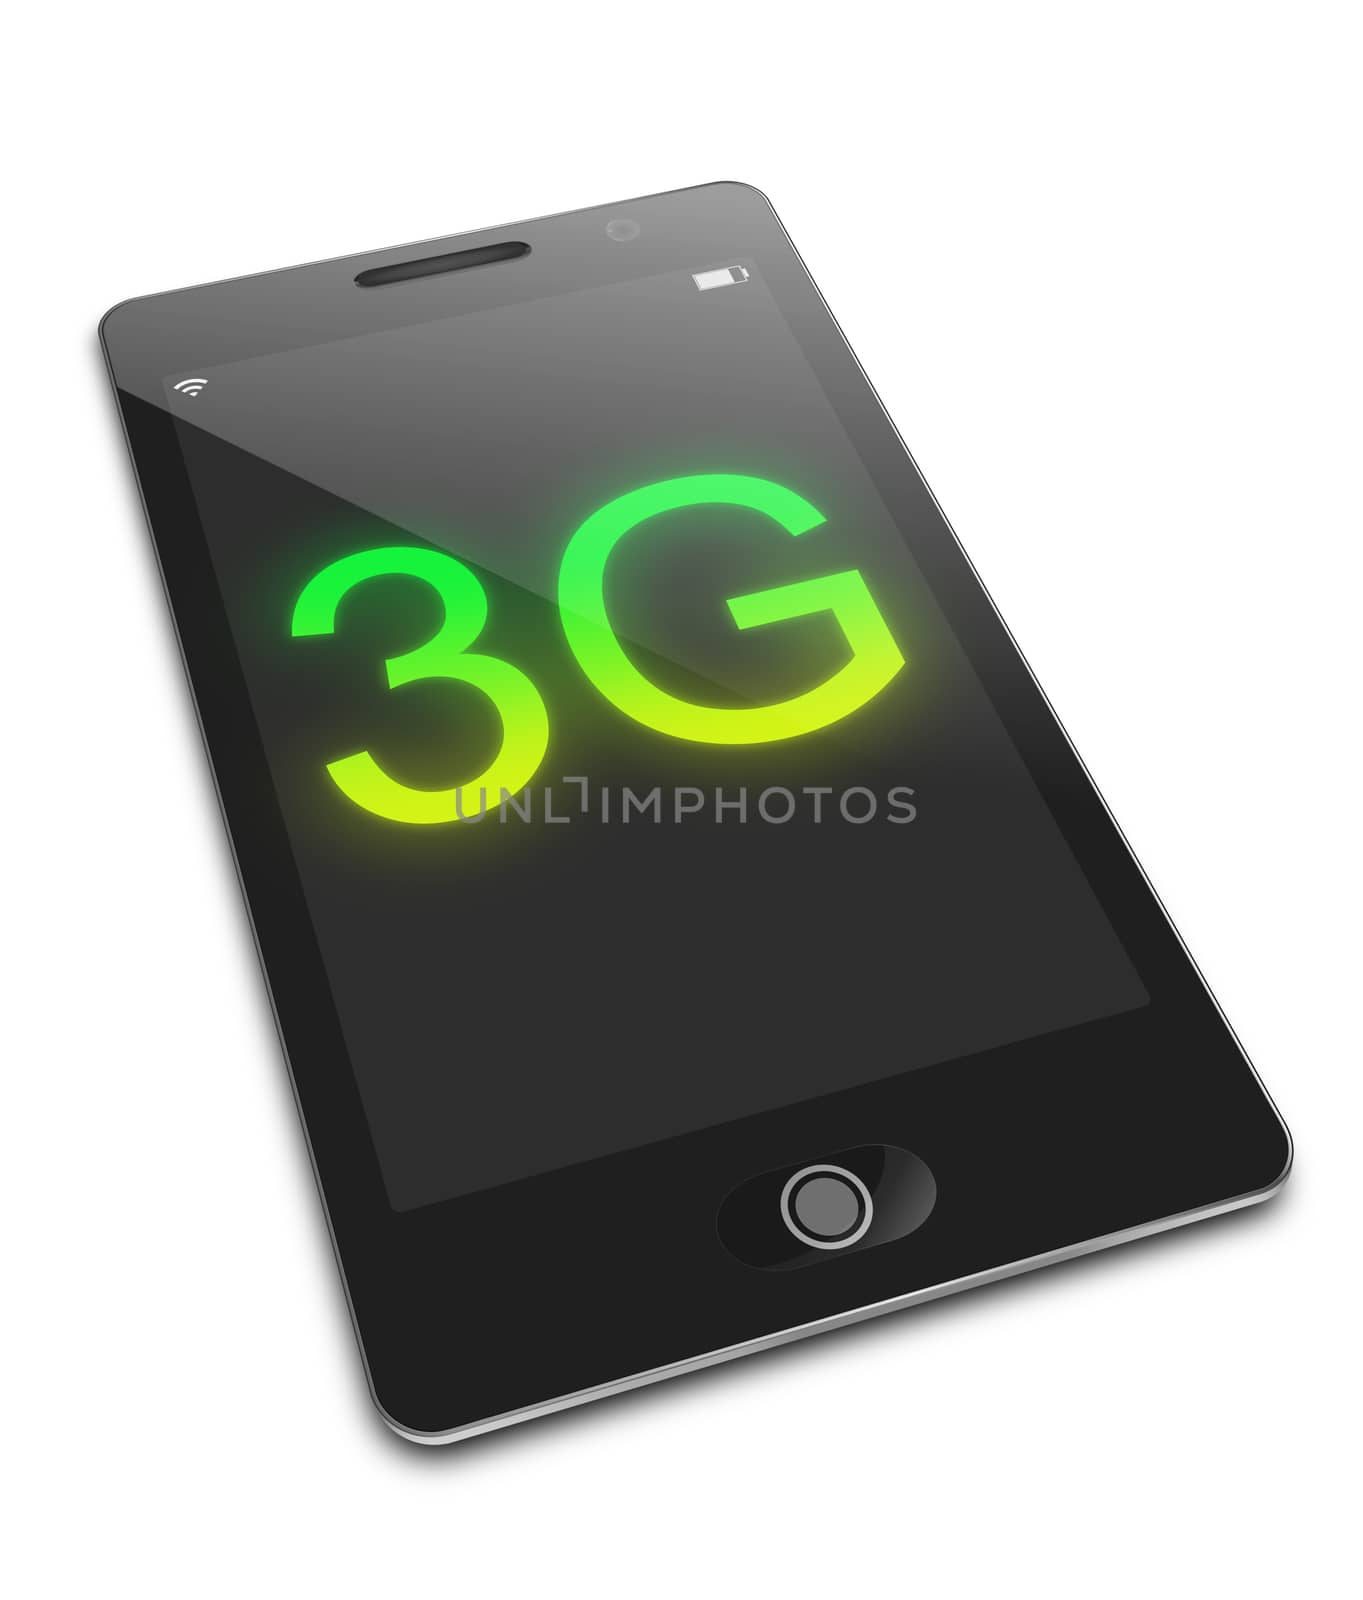 Illustration depicting a phone with a 3G concept.